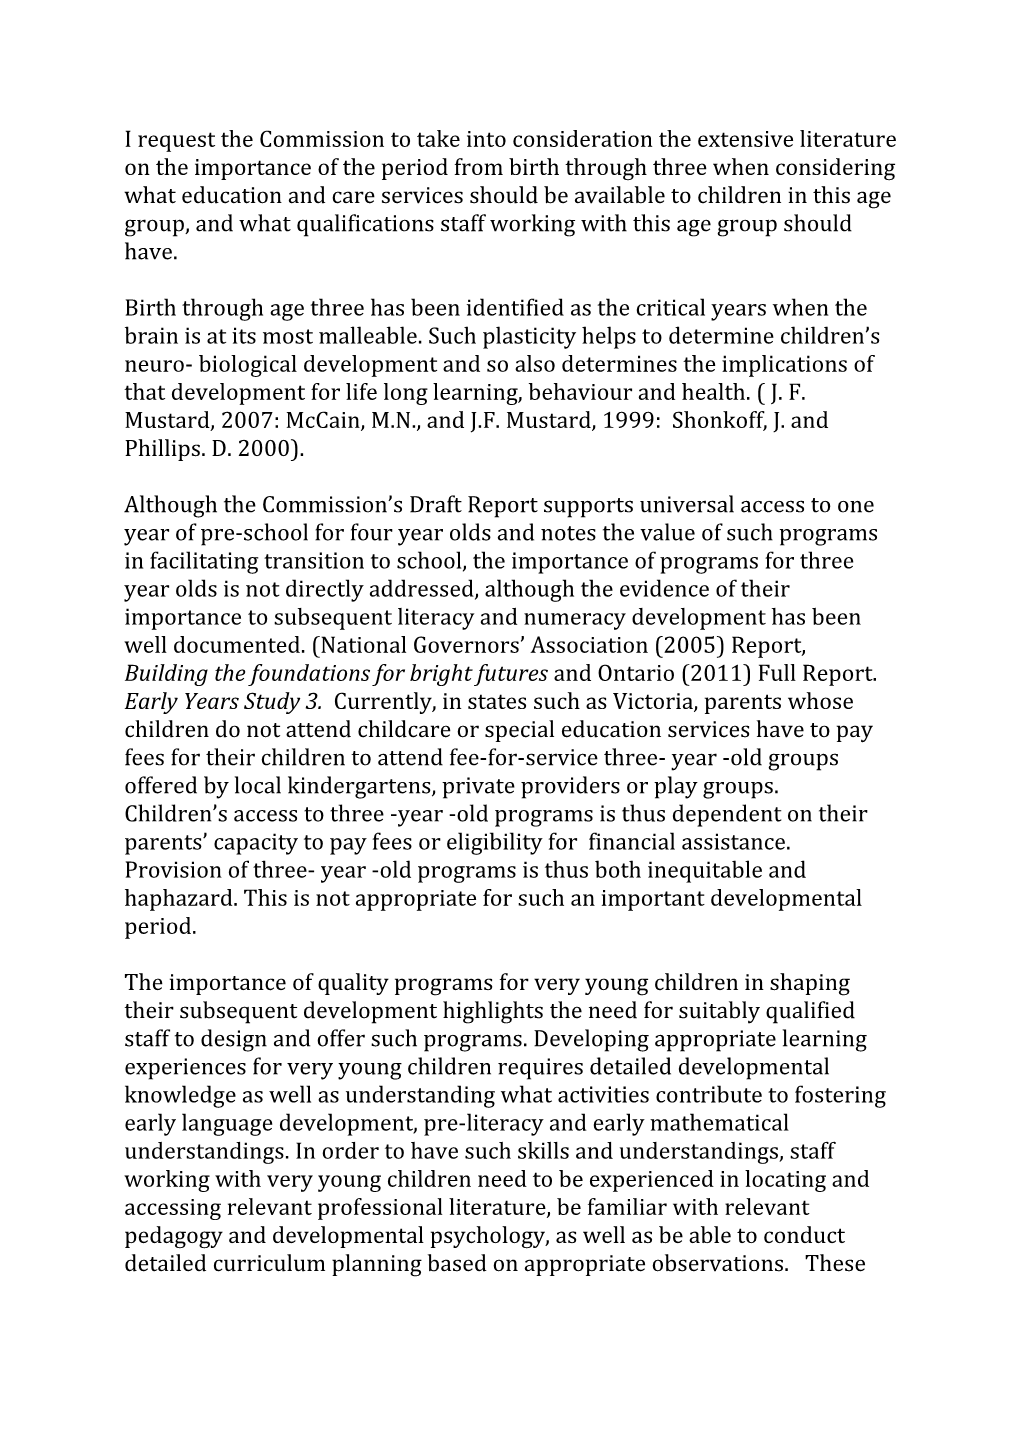 Submission DR566 - Elizabeth Mellor - Childcare and Early Childhood Learning - Public Inquiry